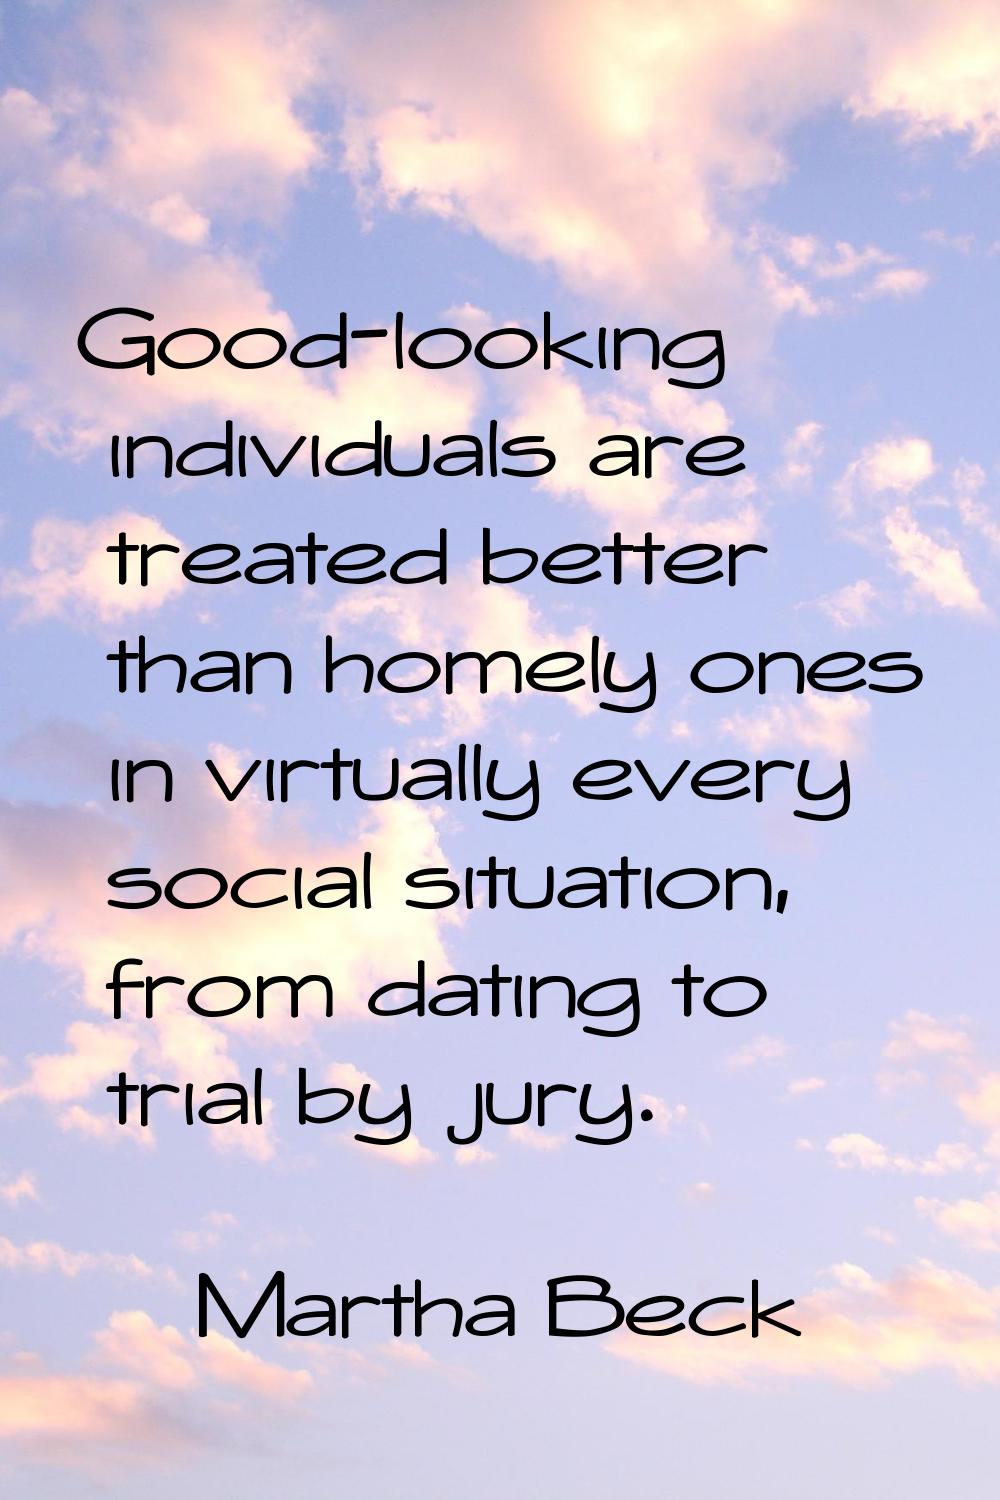 Good-looking individuals are treated better than homely ones in virtually every social situation, f